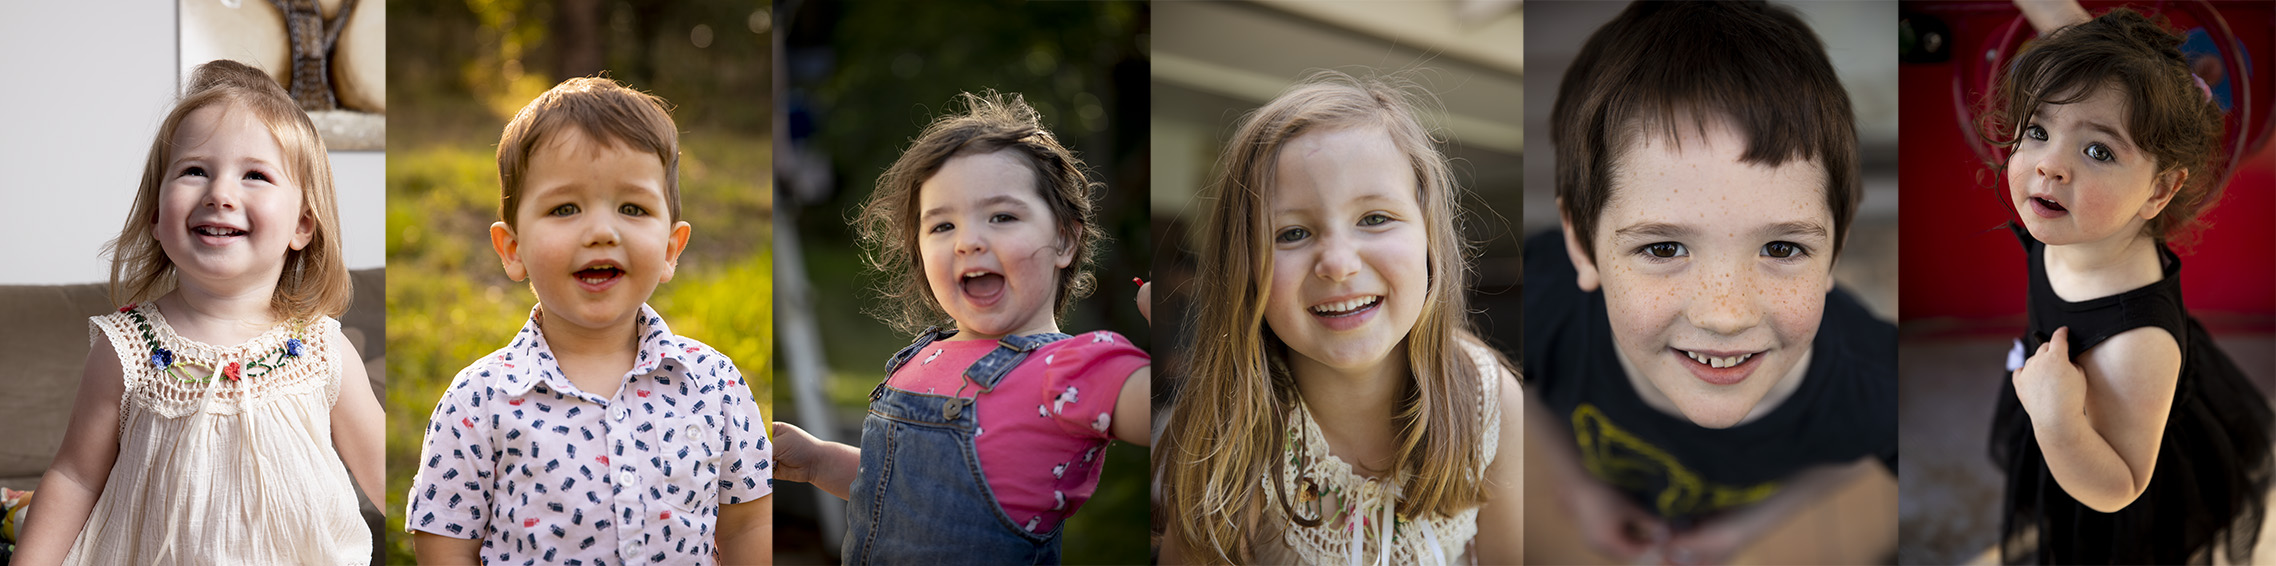 Collage of kindy kid photo examples by Kristina at Of Light and Lens Photography